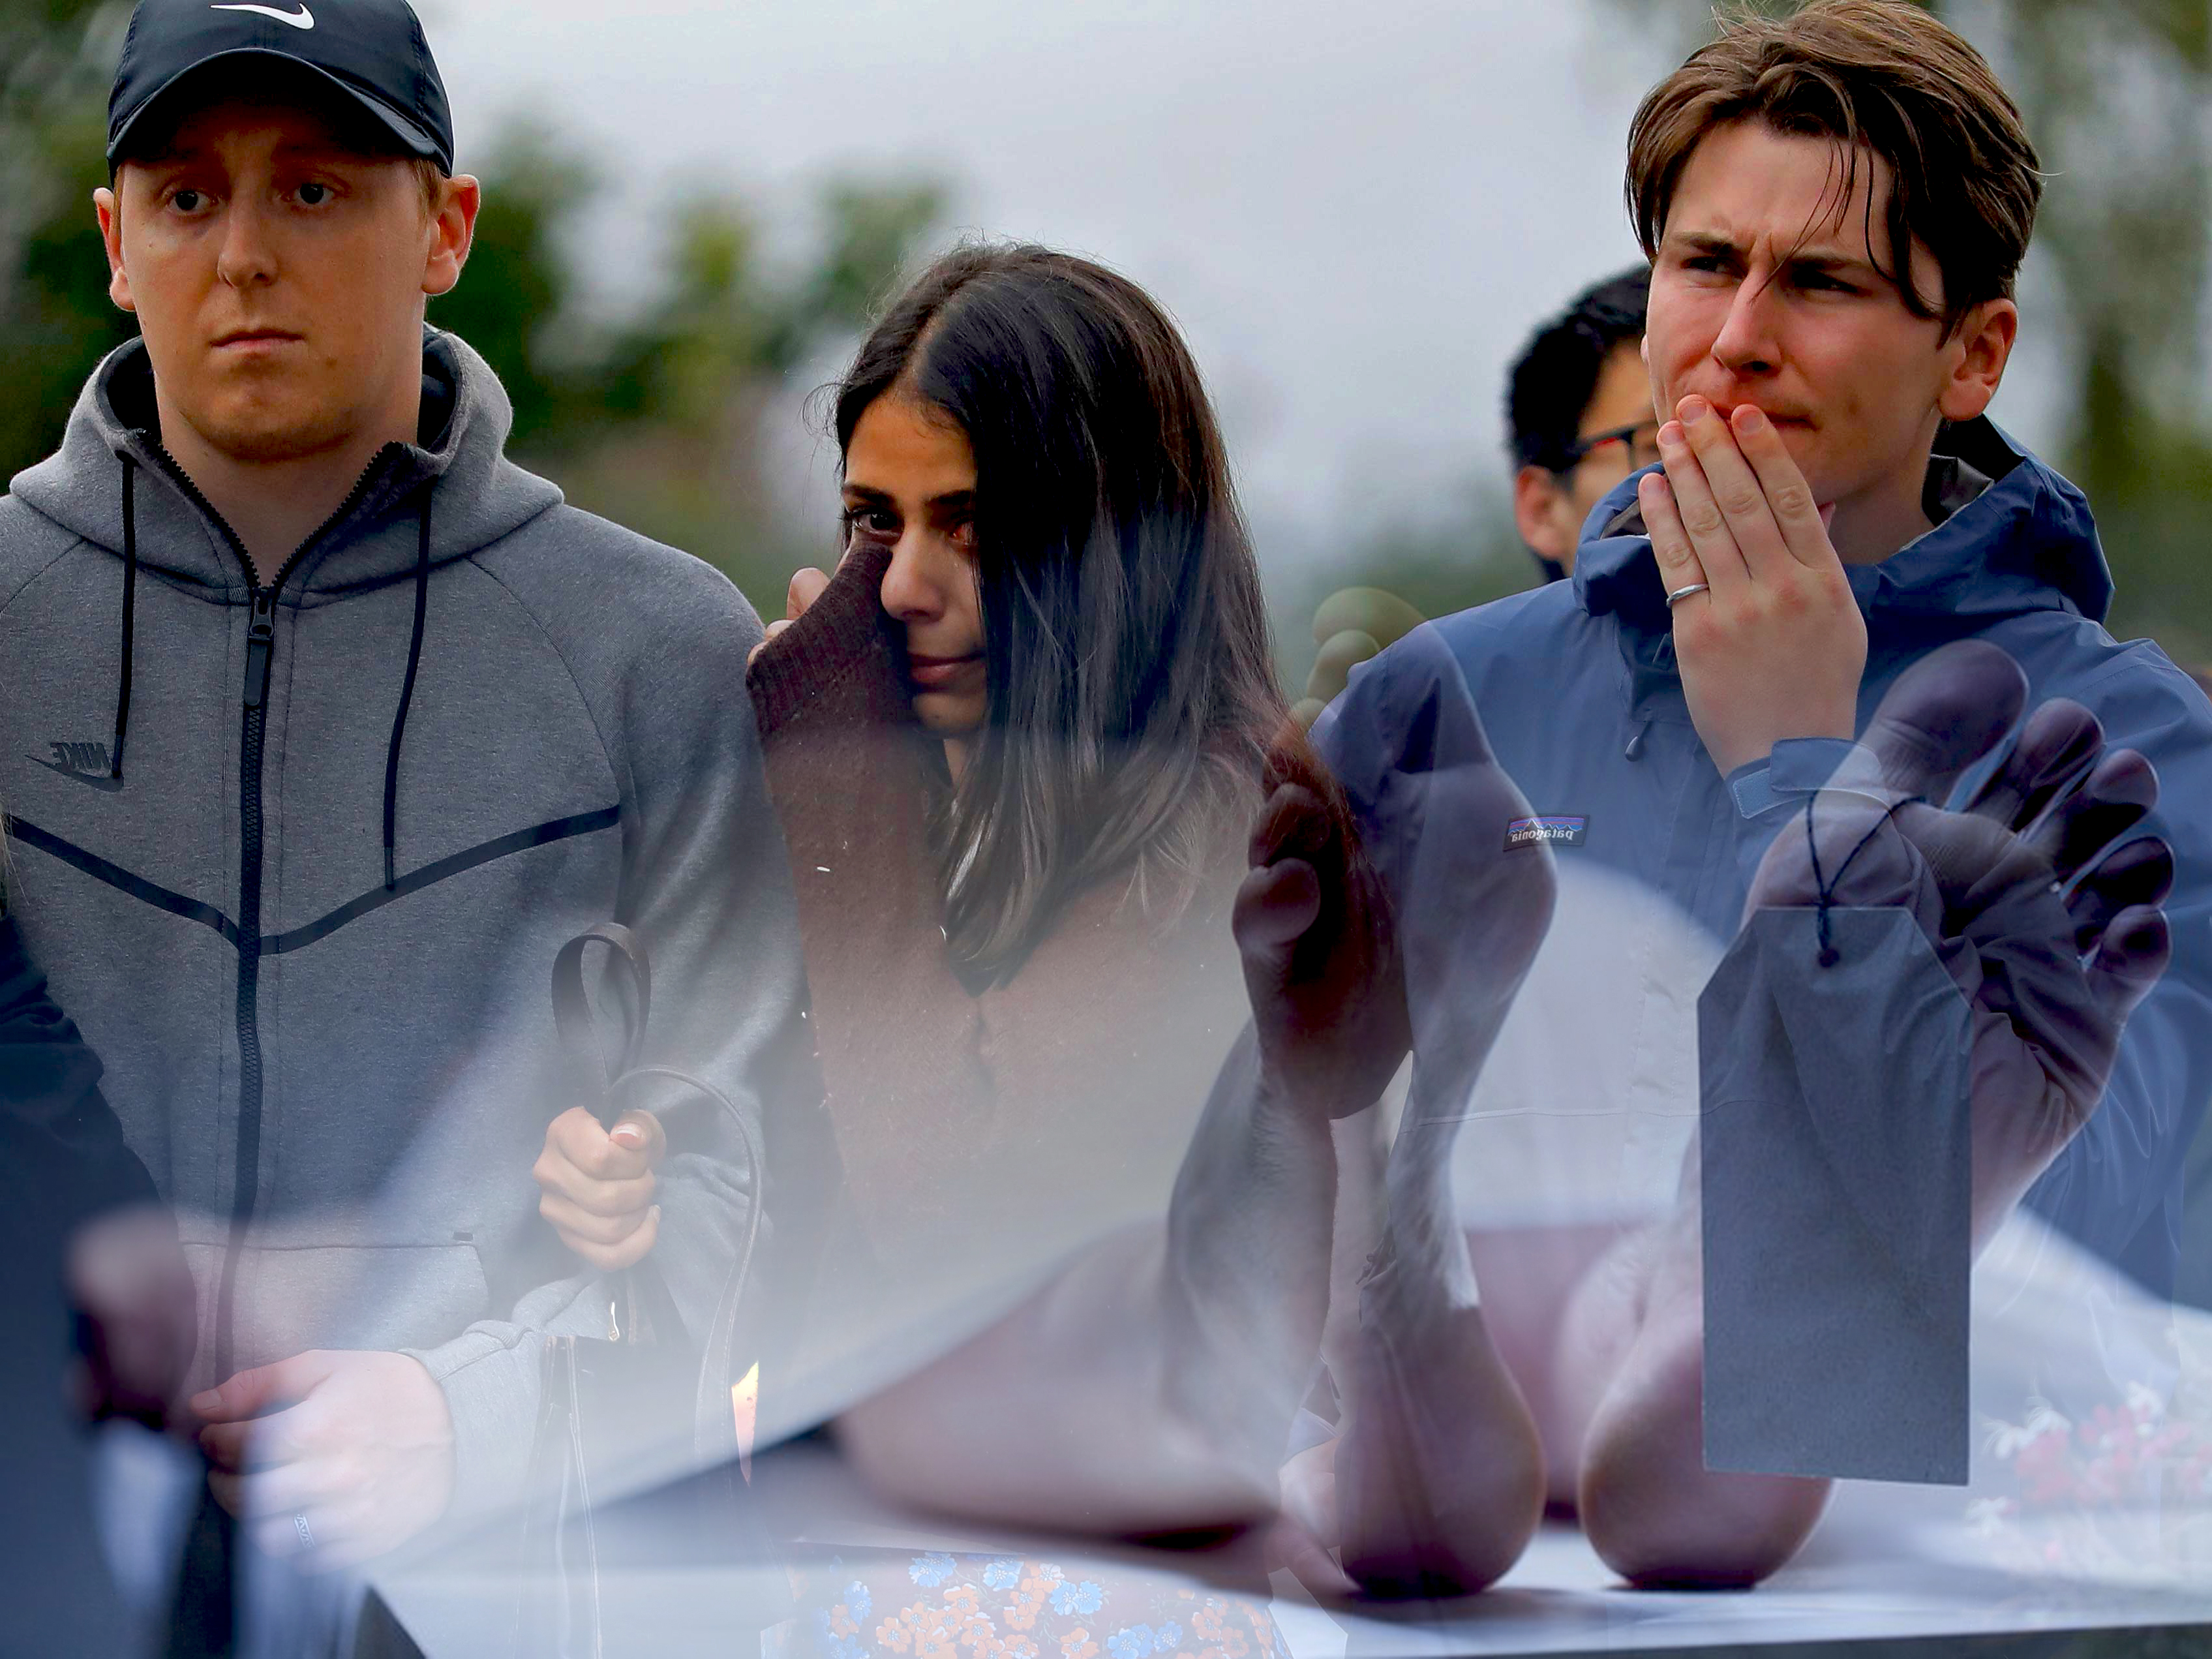 Reactions of New Zealand Citizens on Horrible Attack